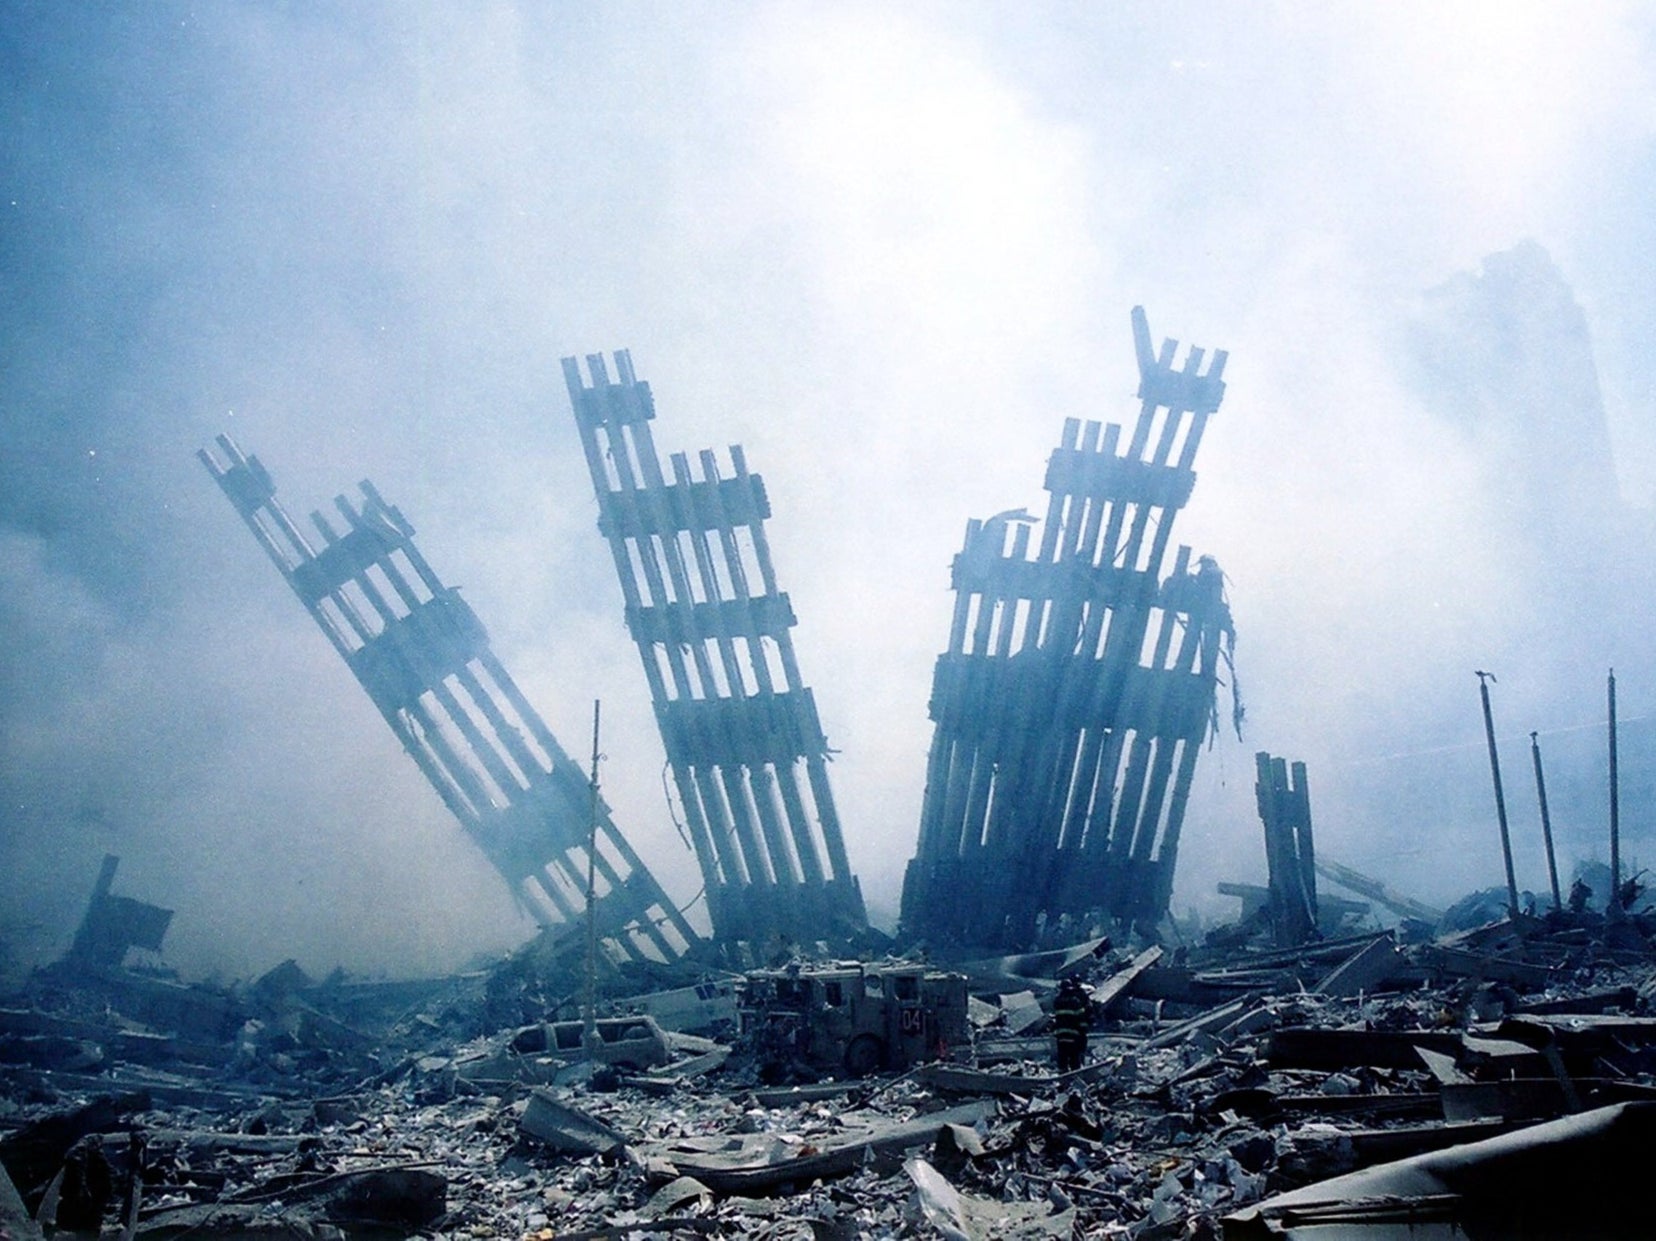 Rubble smolders at the wreckage of the World Trade Center on 11 September, 2001